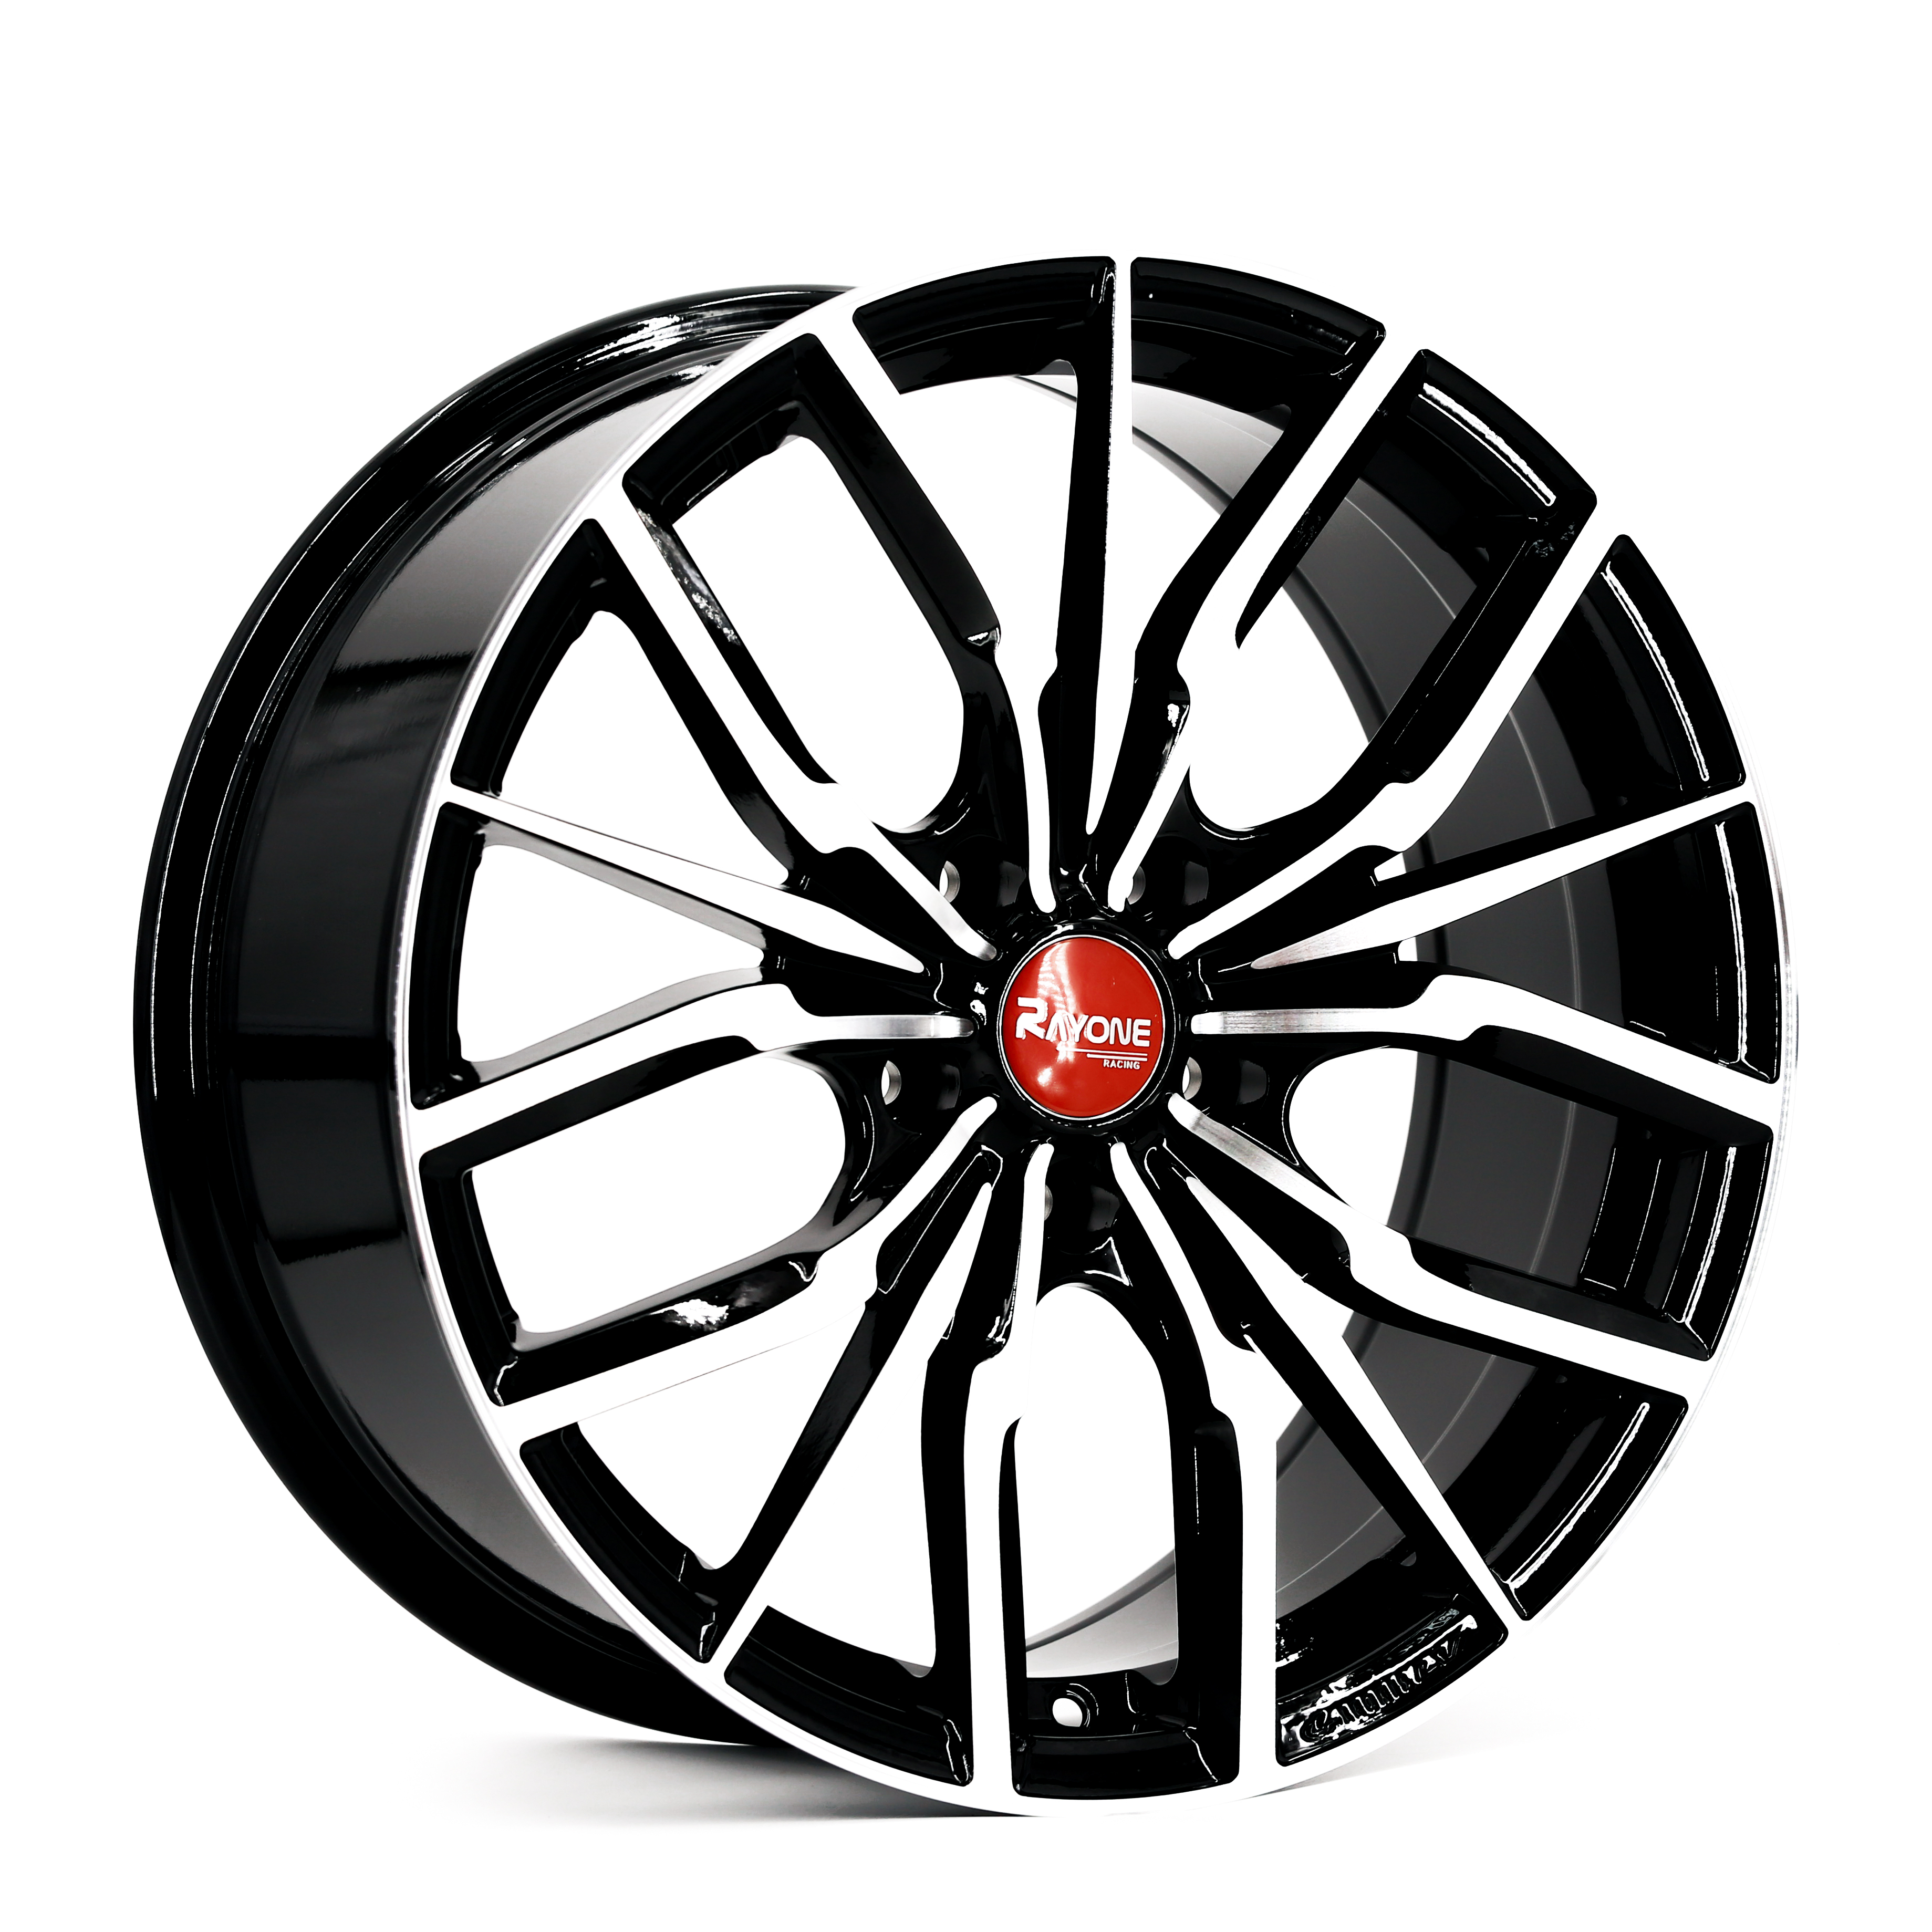 China Manufacturer for Mag Wheels Preston - DM125 18Inch Aluminum Alloy Wheel Rims For Passenger Cars – Rayone